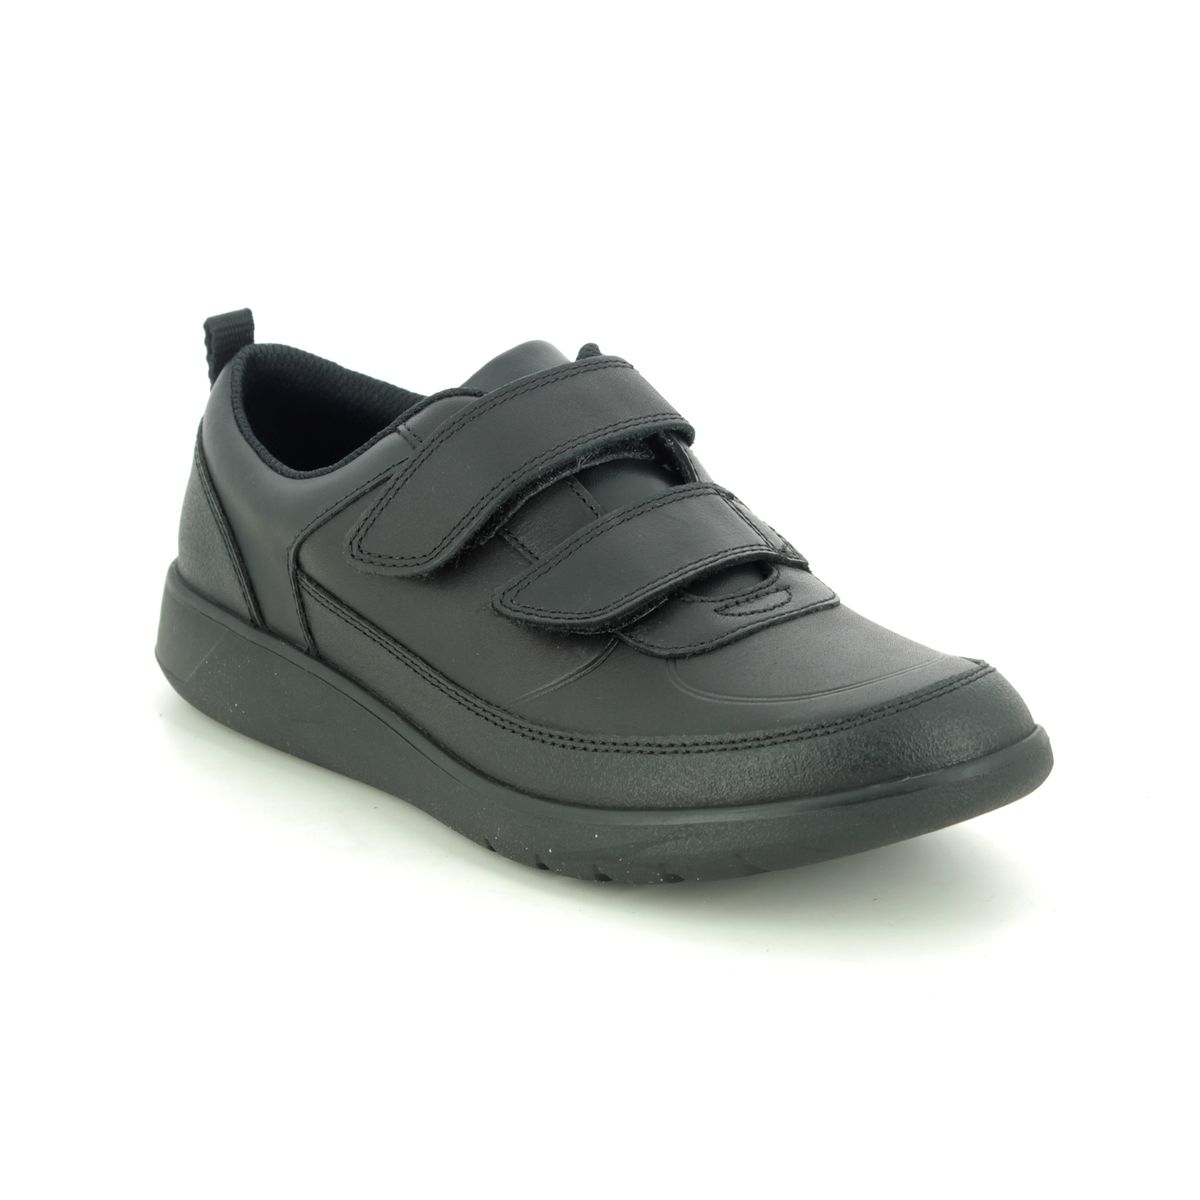 Clarks Scape Flare Y Black Leather Kids Boys Shoes 494096F In Size 5 In Plain Black Leather F Width Fitting Regular Fit For School For kids